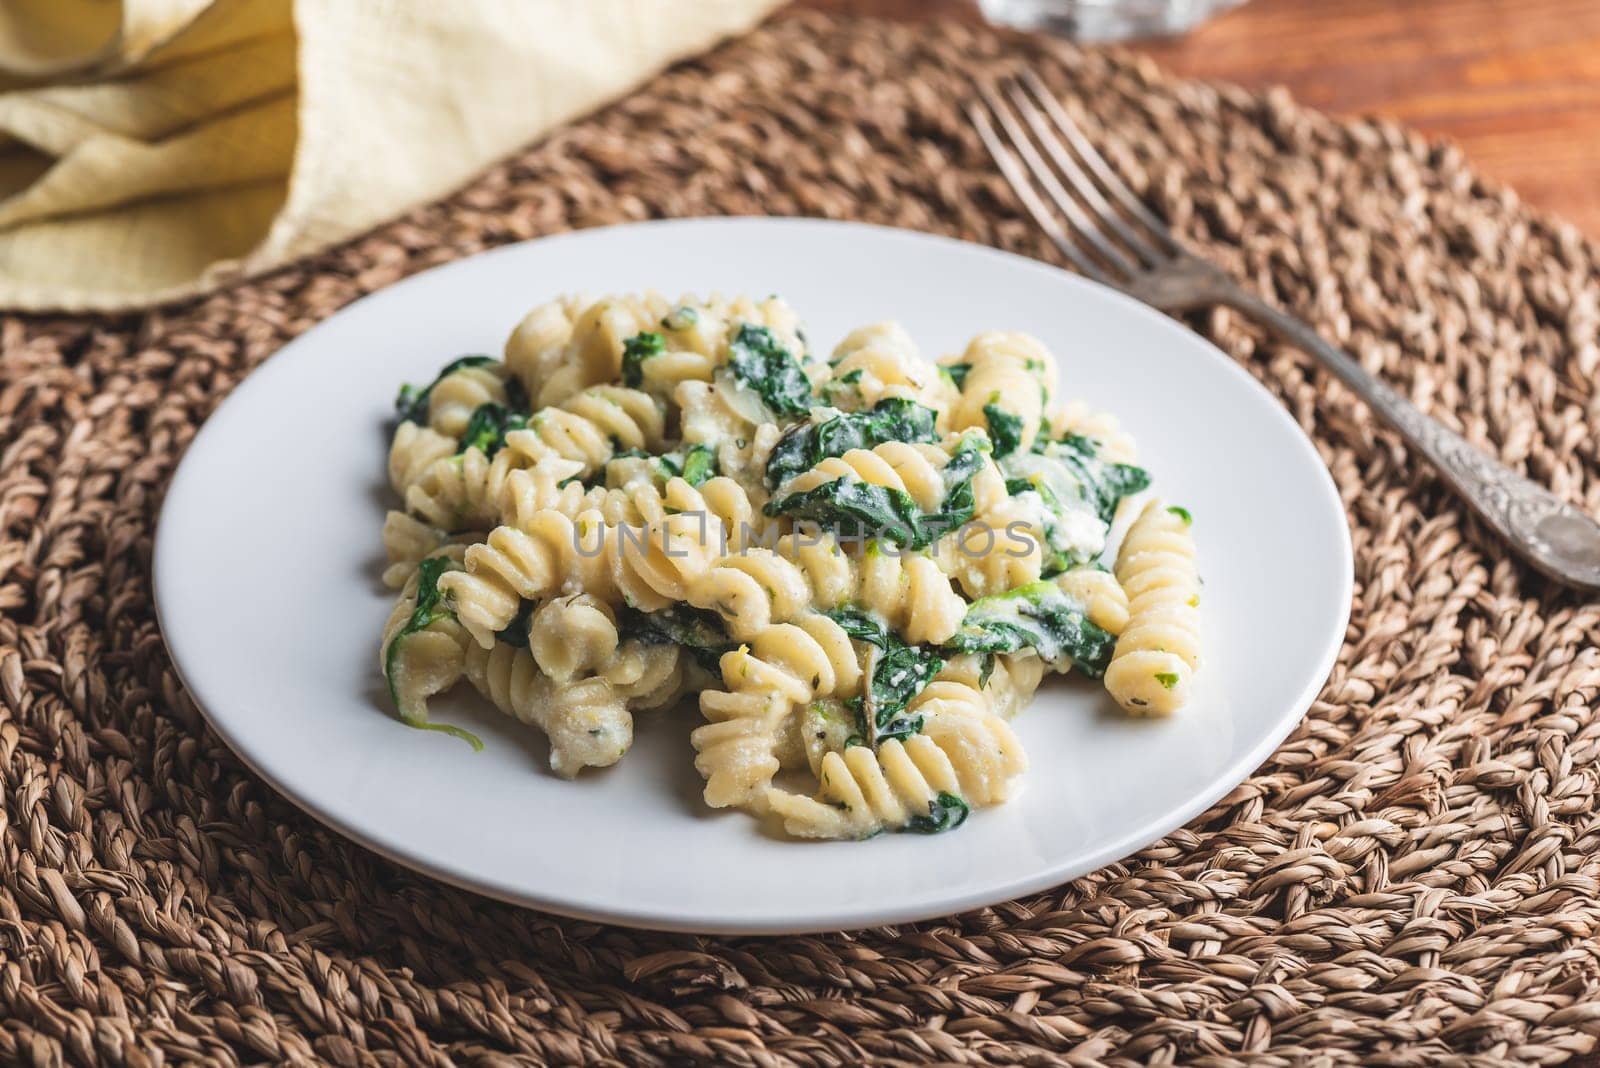 Spinach Pasta with Ricotta and Parmesan Cheese